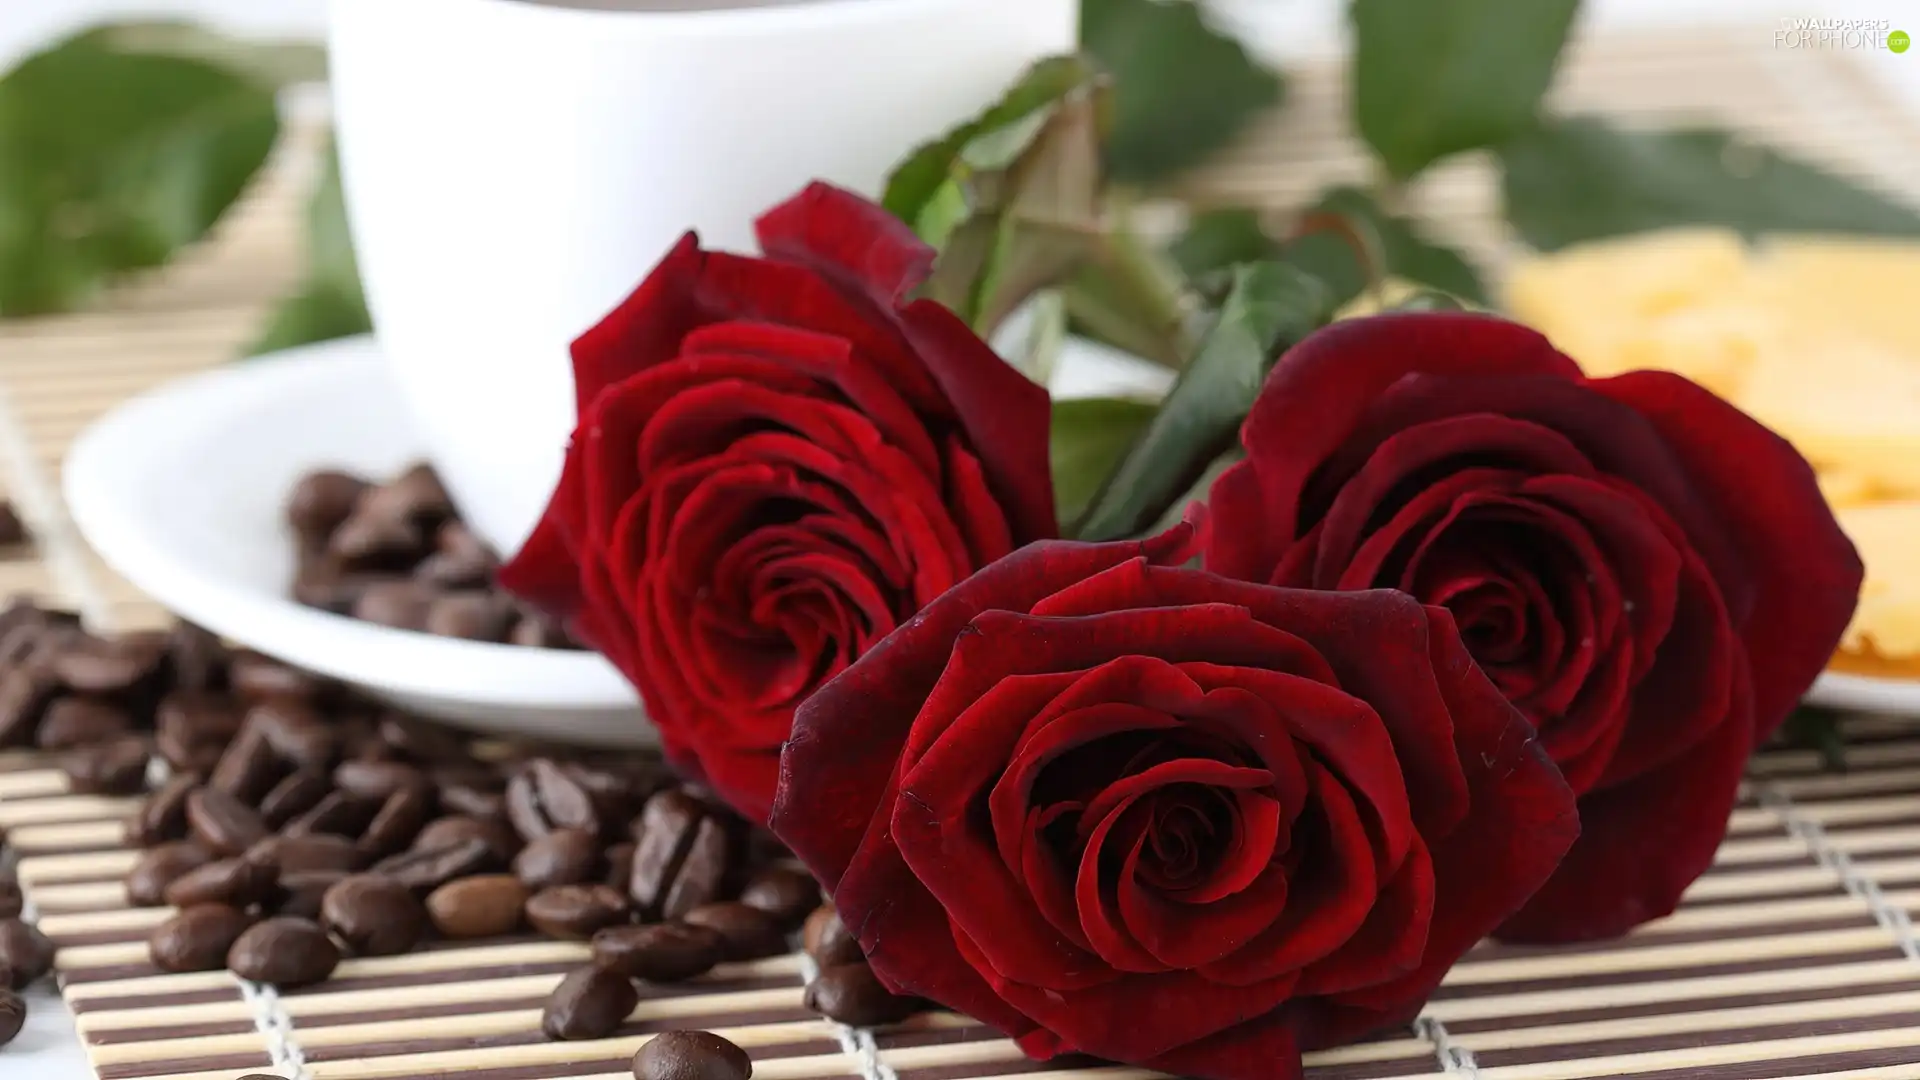 grains, coffee, roses, cup, Three